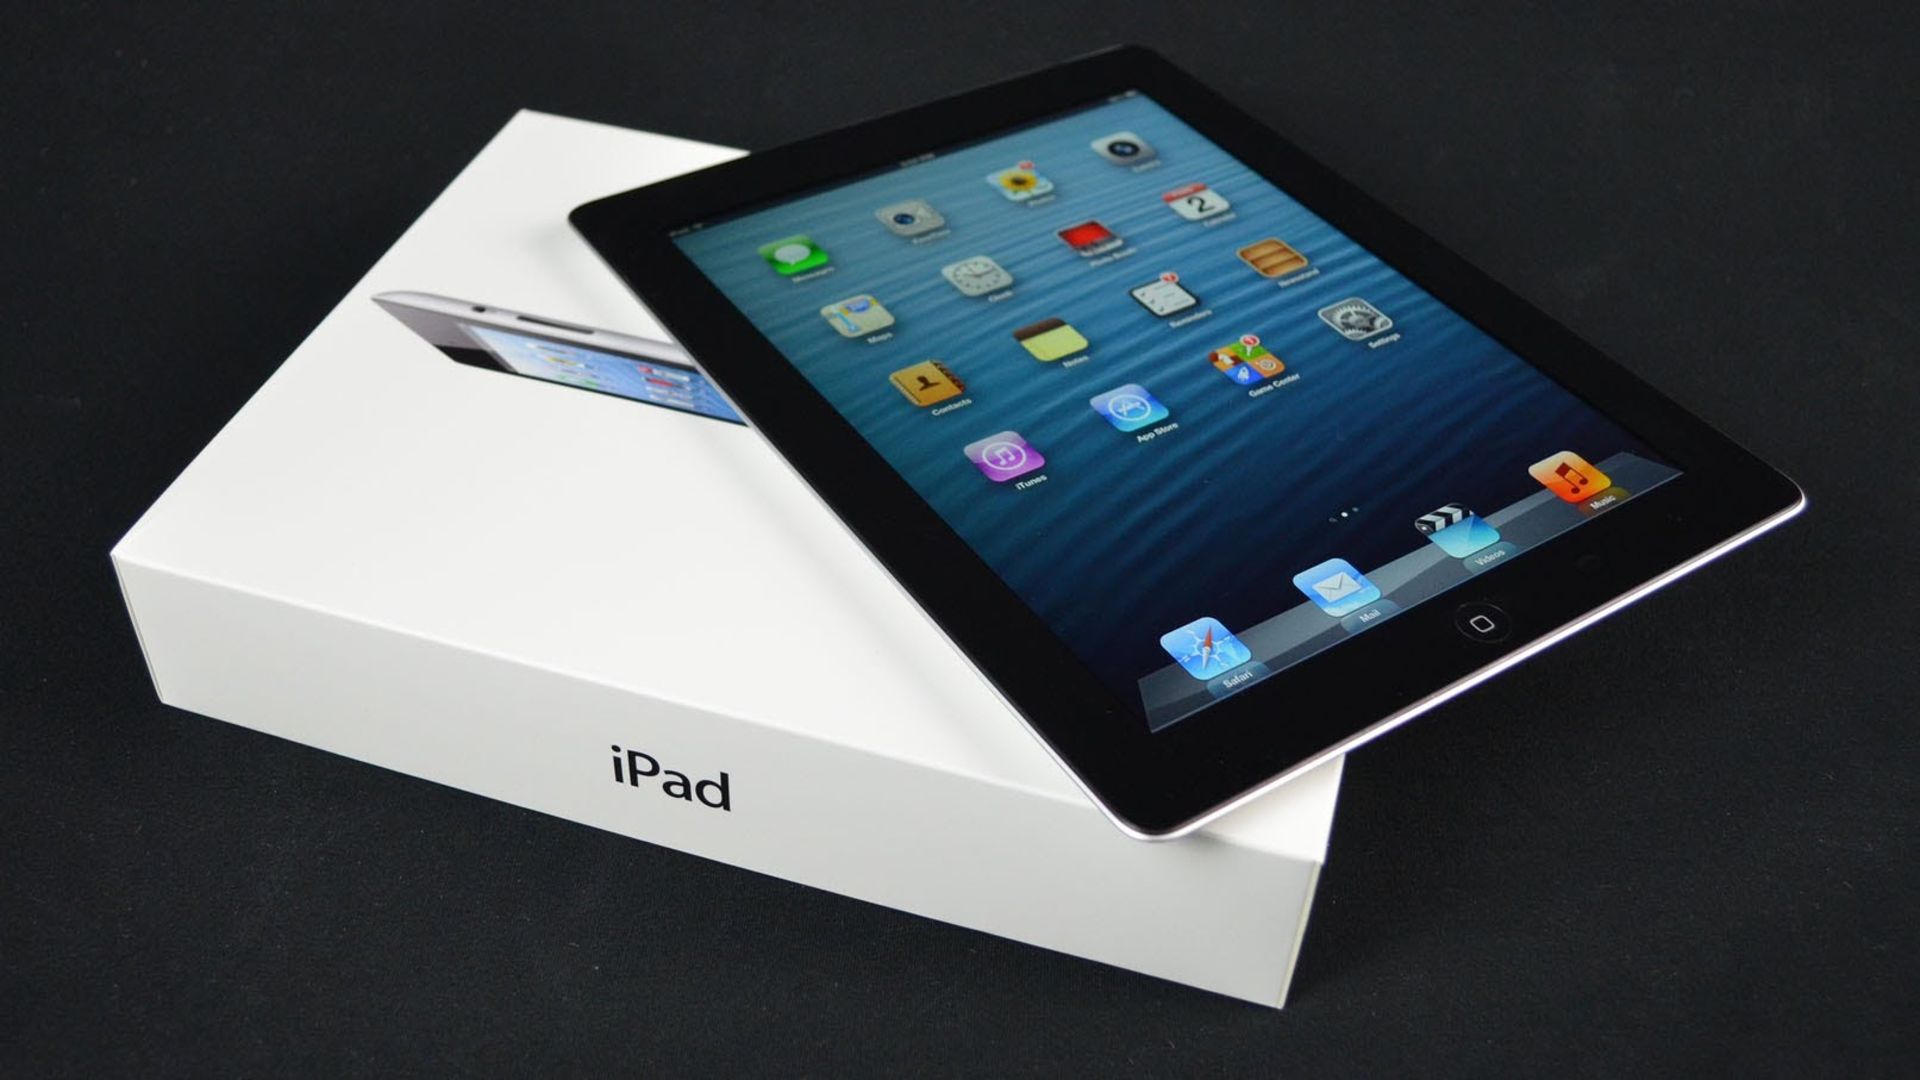 V Grade B Apple iPad 4 16GB - Black - Wi-Fi - Unit Only X 2 YOUR BID PRICE TO BE MULTIPLIED BY TWO